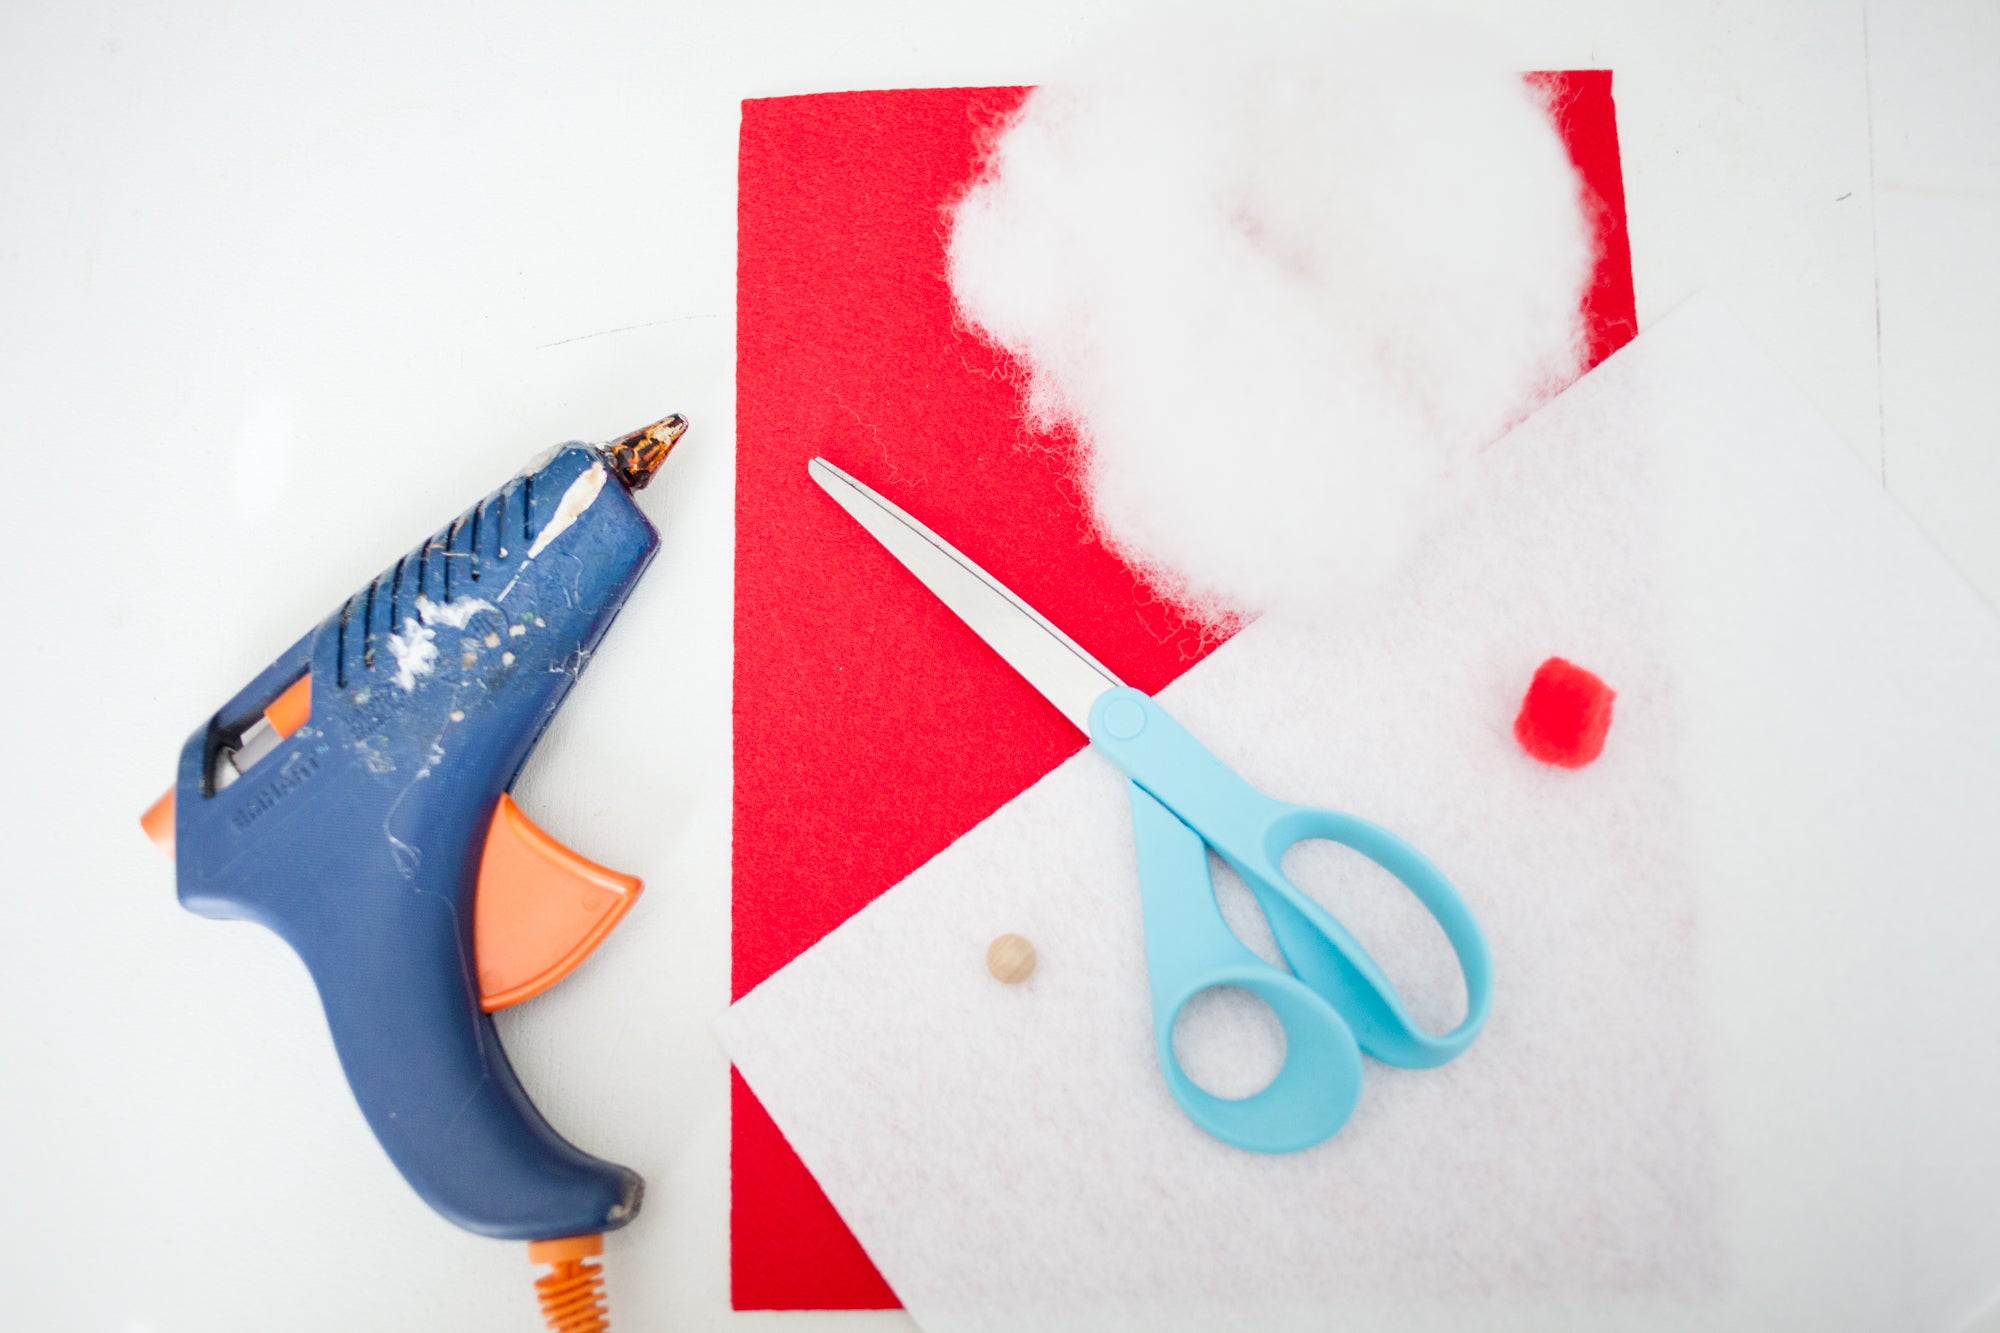 DIY How to Make a Santa Wine Toppers